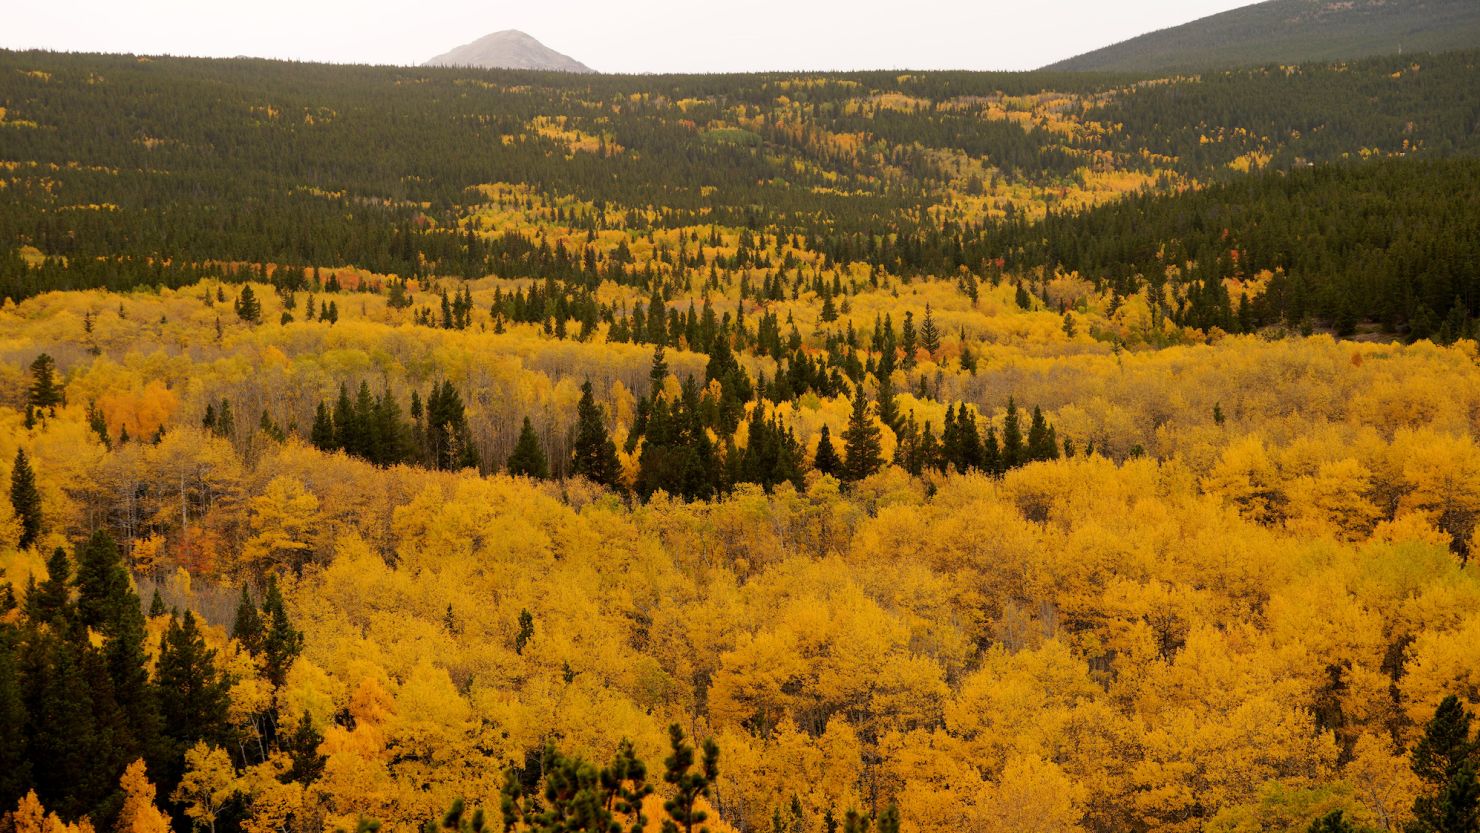 Some areas coping with drought conditions could see more muted fall colors.